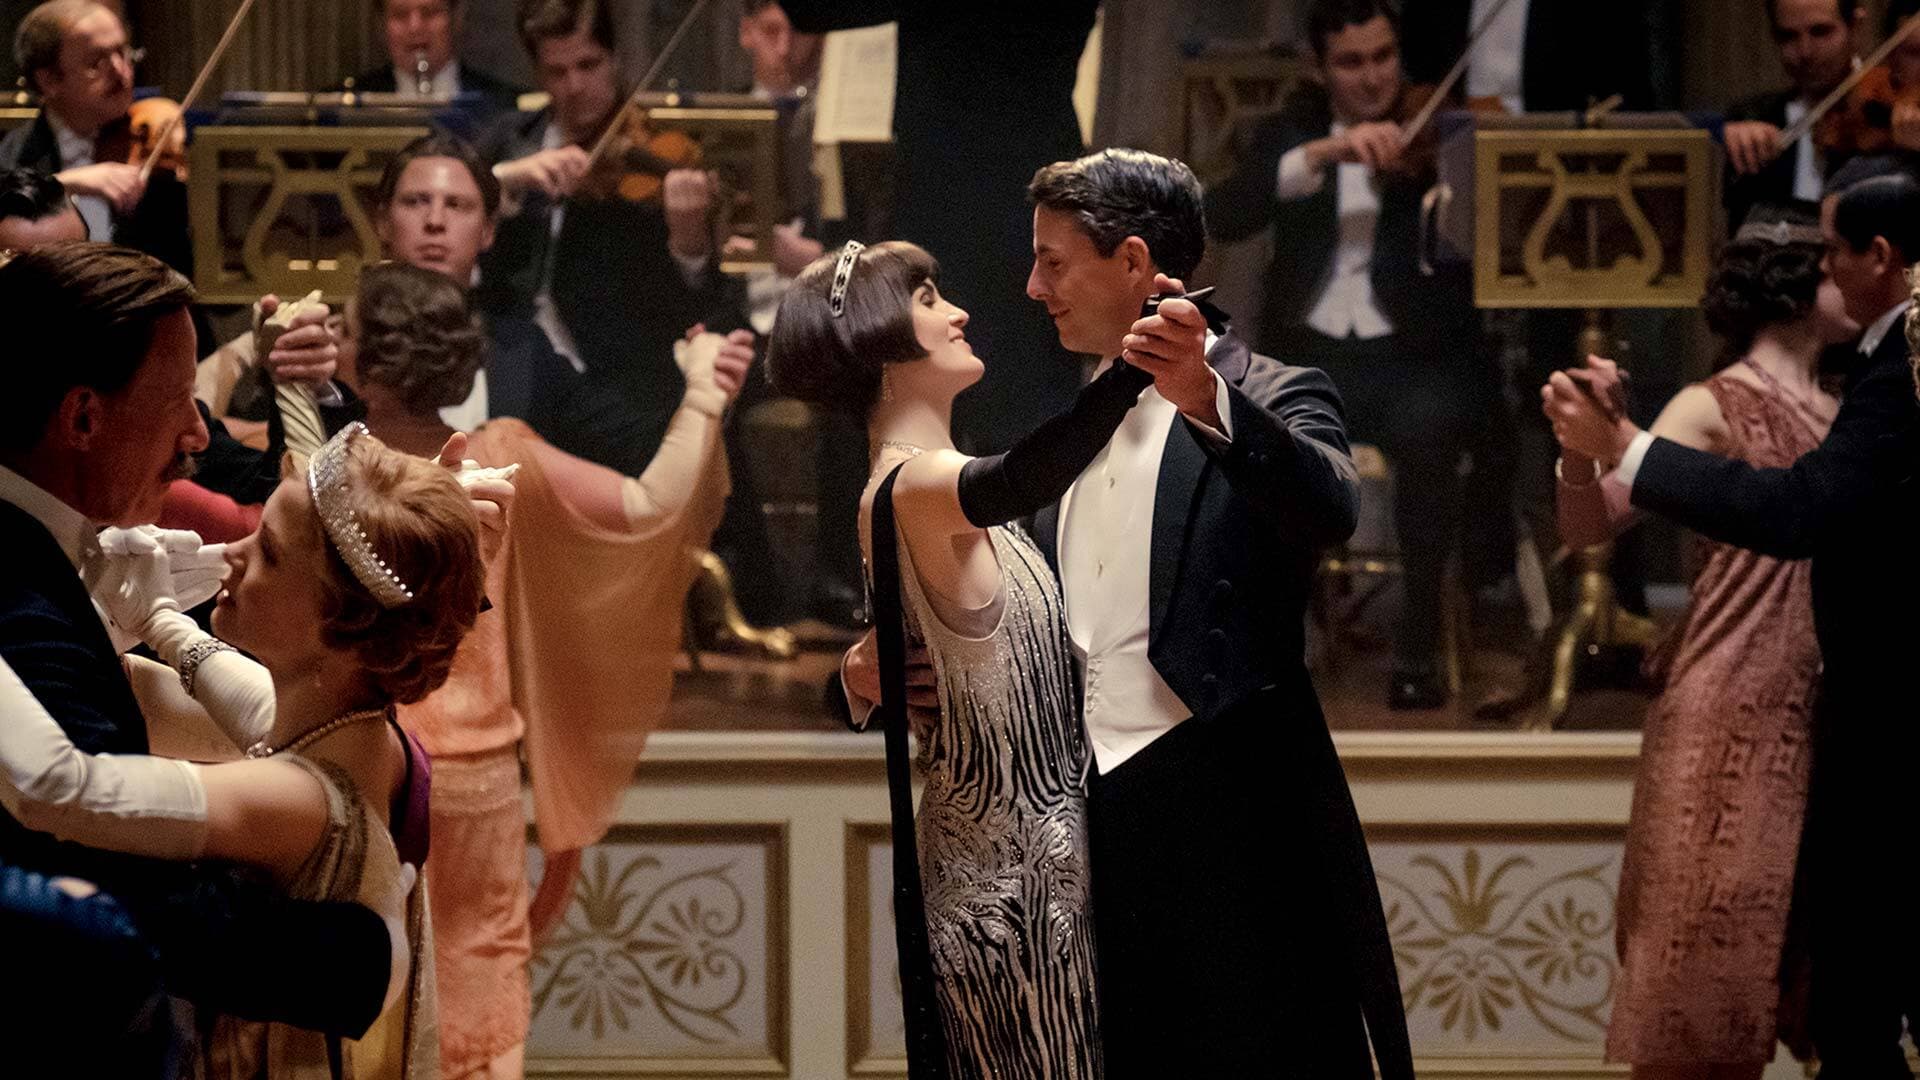 Still from "Downton Abbey" movie, showing Michelle Dockery as Lady Mary Talbot dancing with Matthew Goode as Henry Talbot